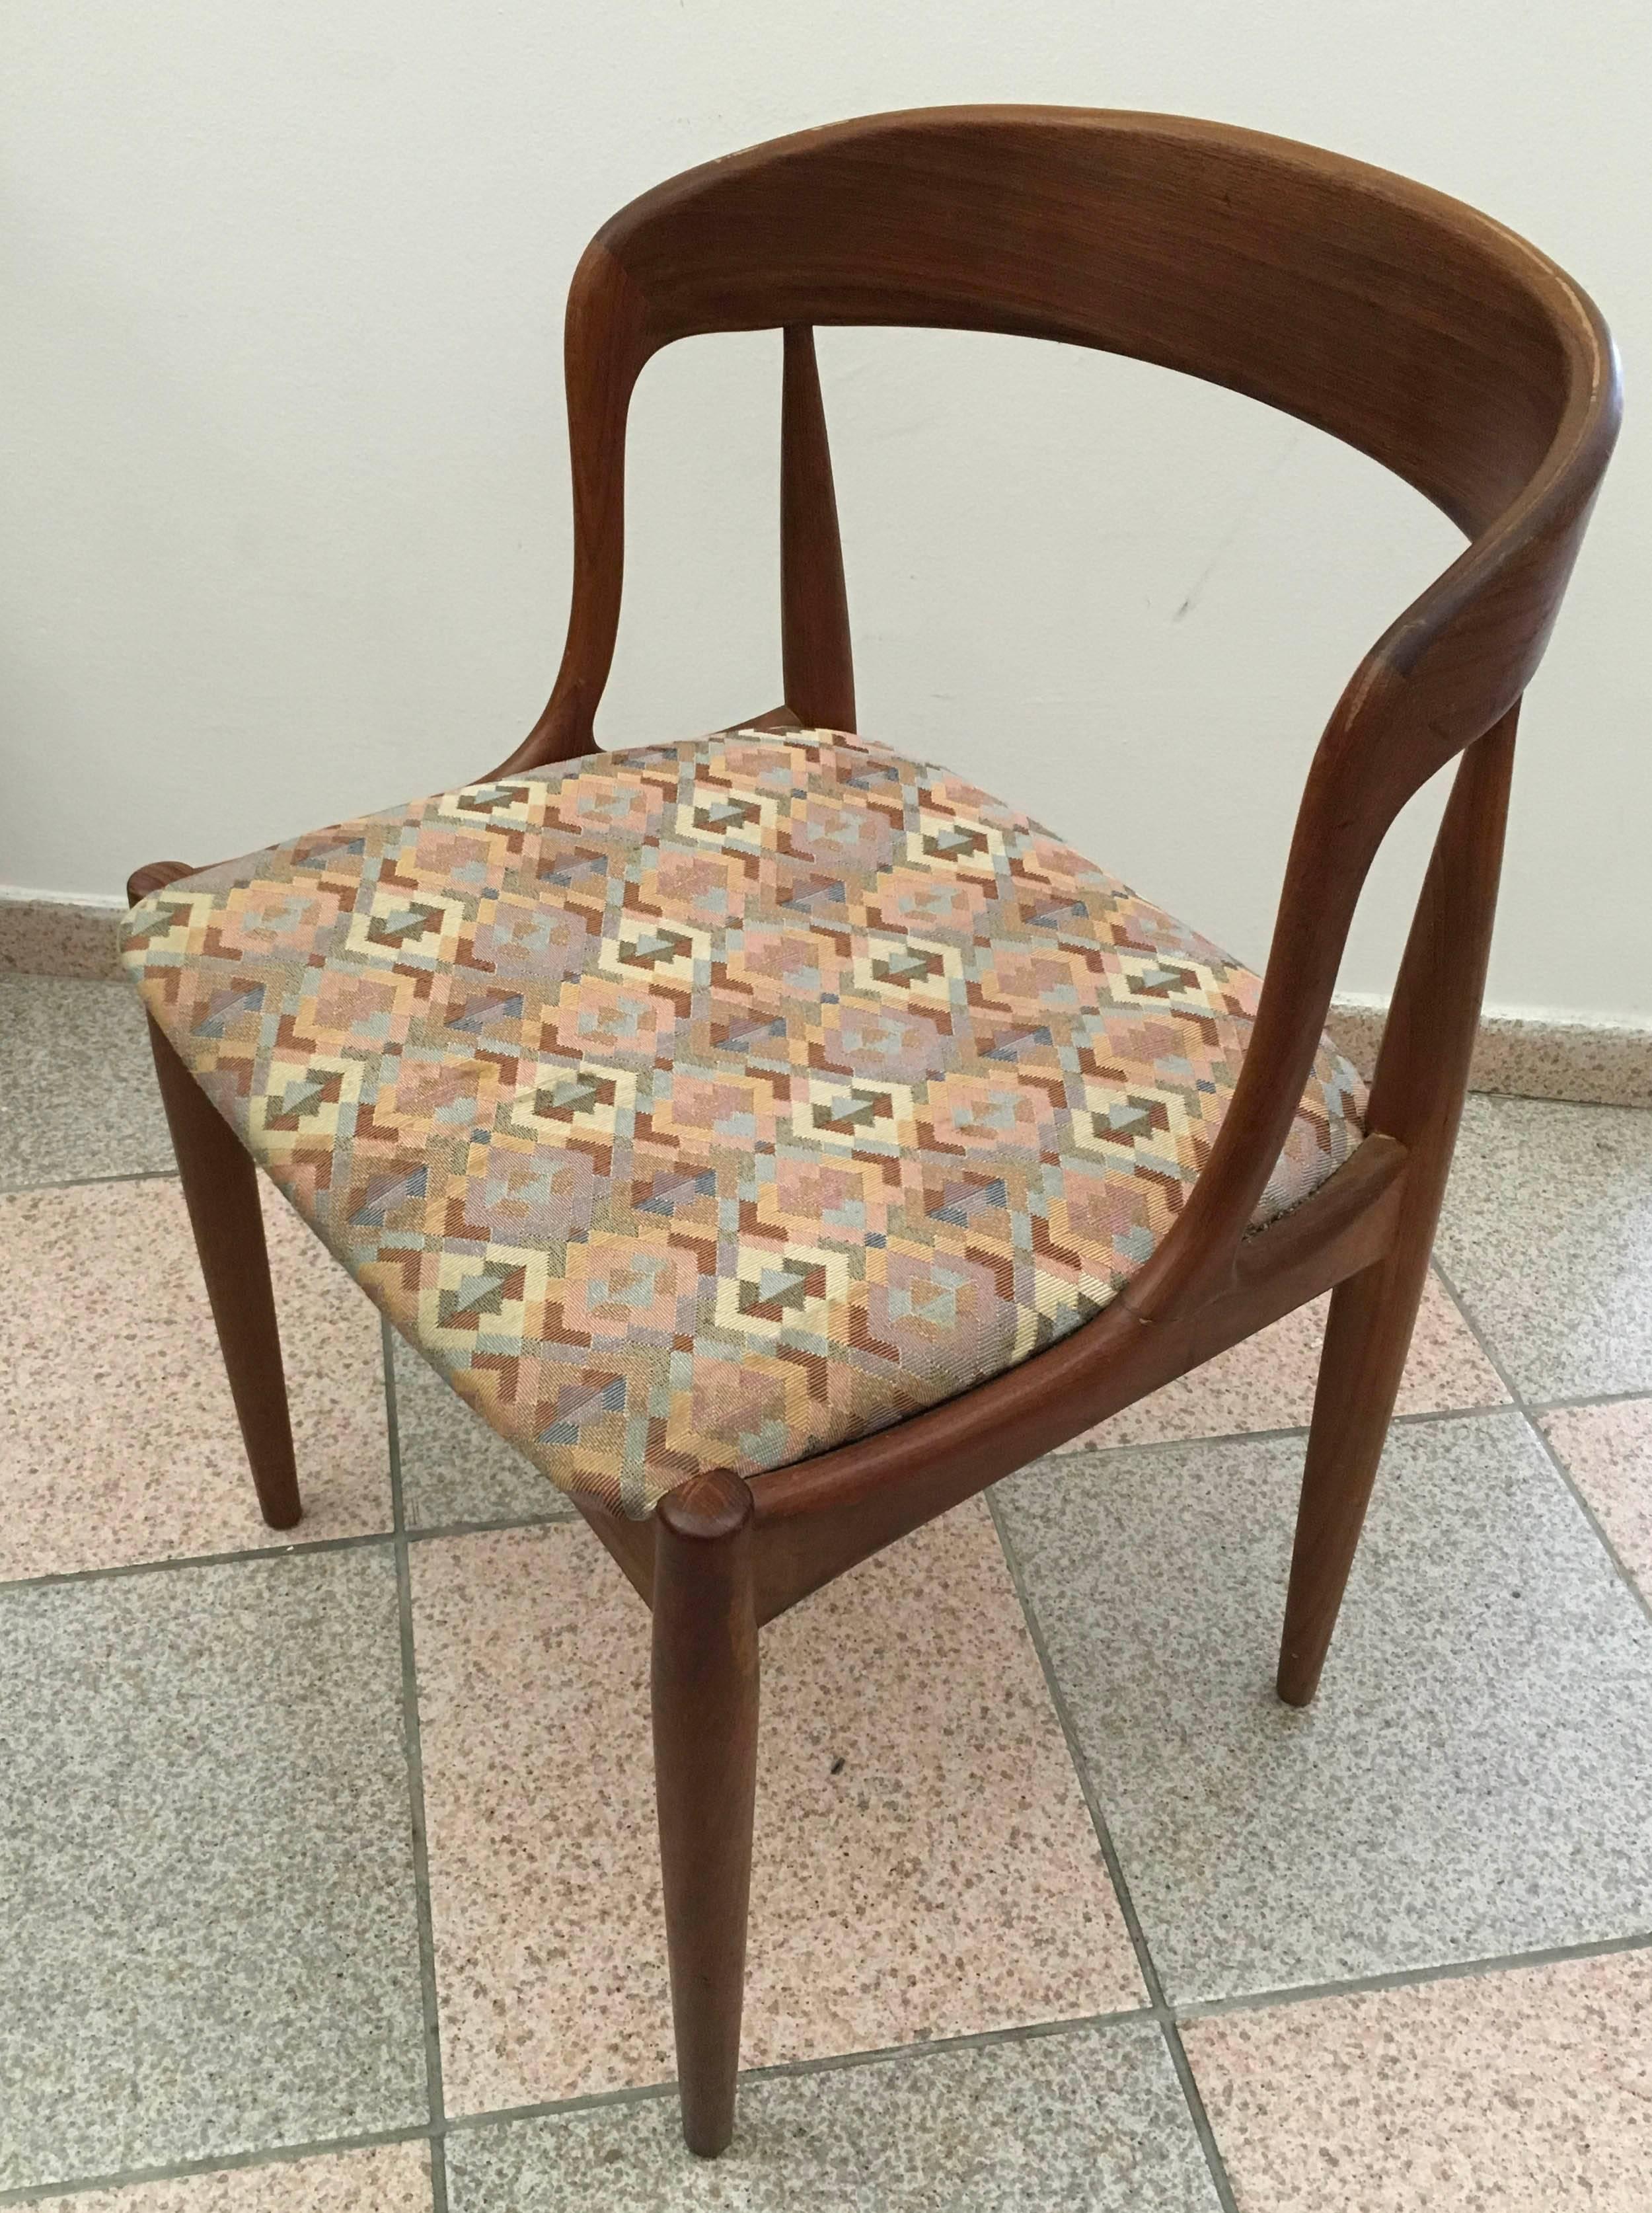 Four teak dining chairs by Johannes Andersen made in Denmark in the early 1960s.
New upholstery possible on request for 200usd/set + costs of the fabric.